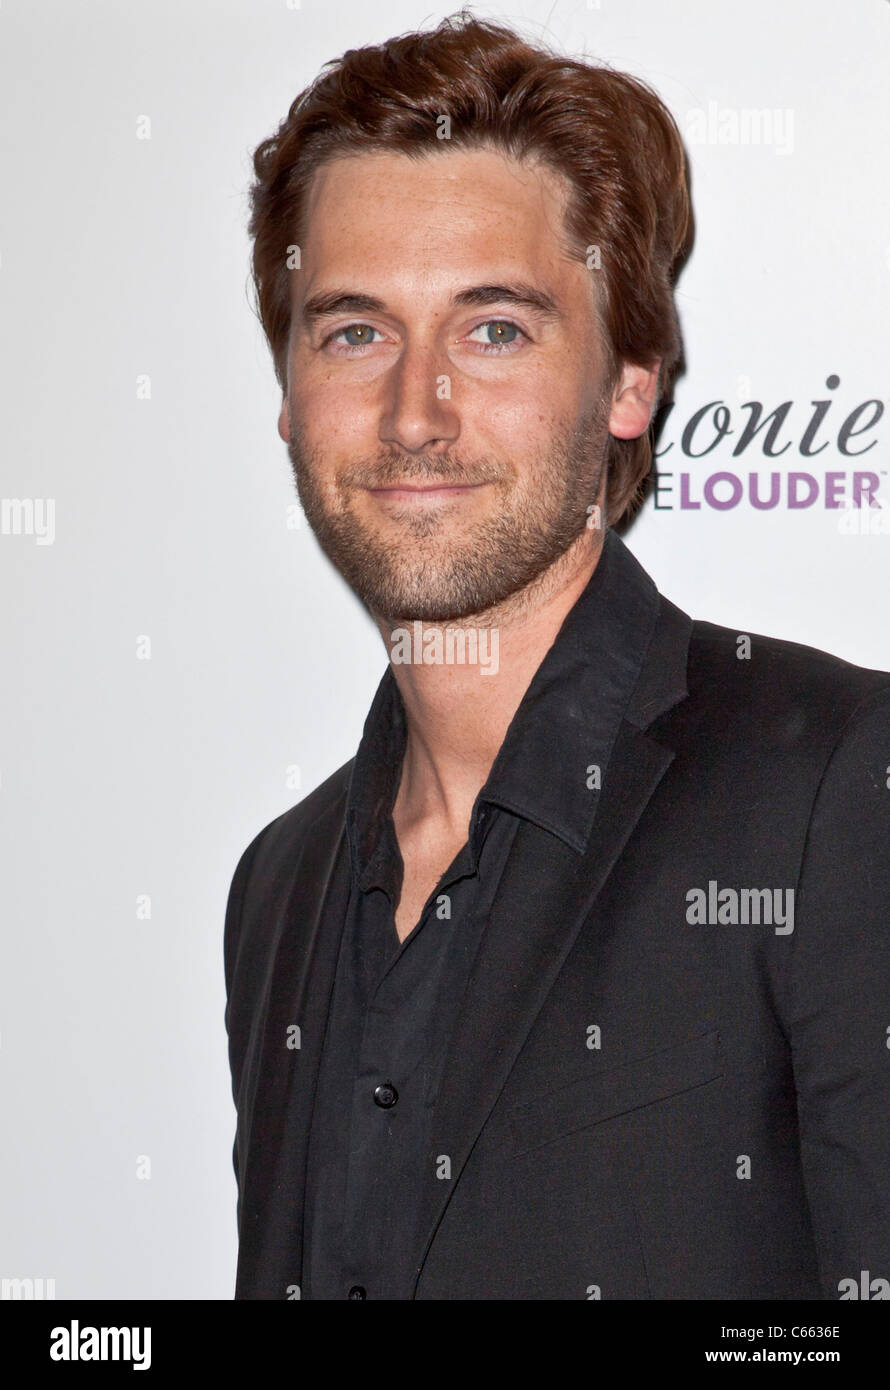 Ryan Eggold at arrivals for LOVE WEDDING MARRIAGE Premiere, Pacific Design Center, Los Angeles, CA May 17, 2011. Photo By: Emiley Schweich/Everett Collection Stock Photo